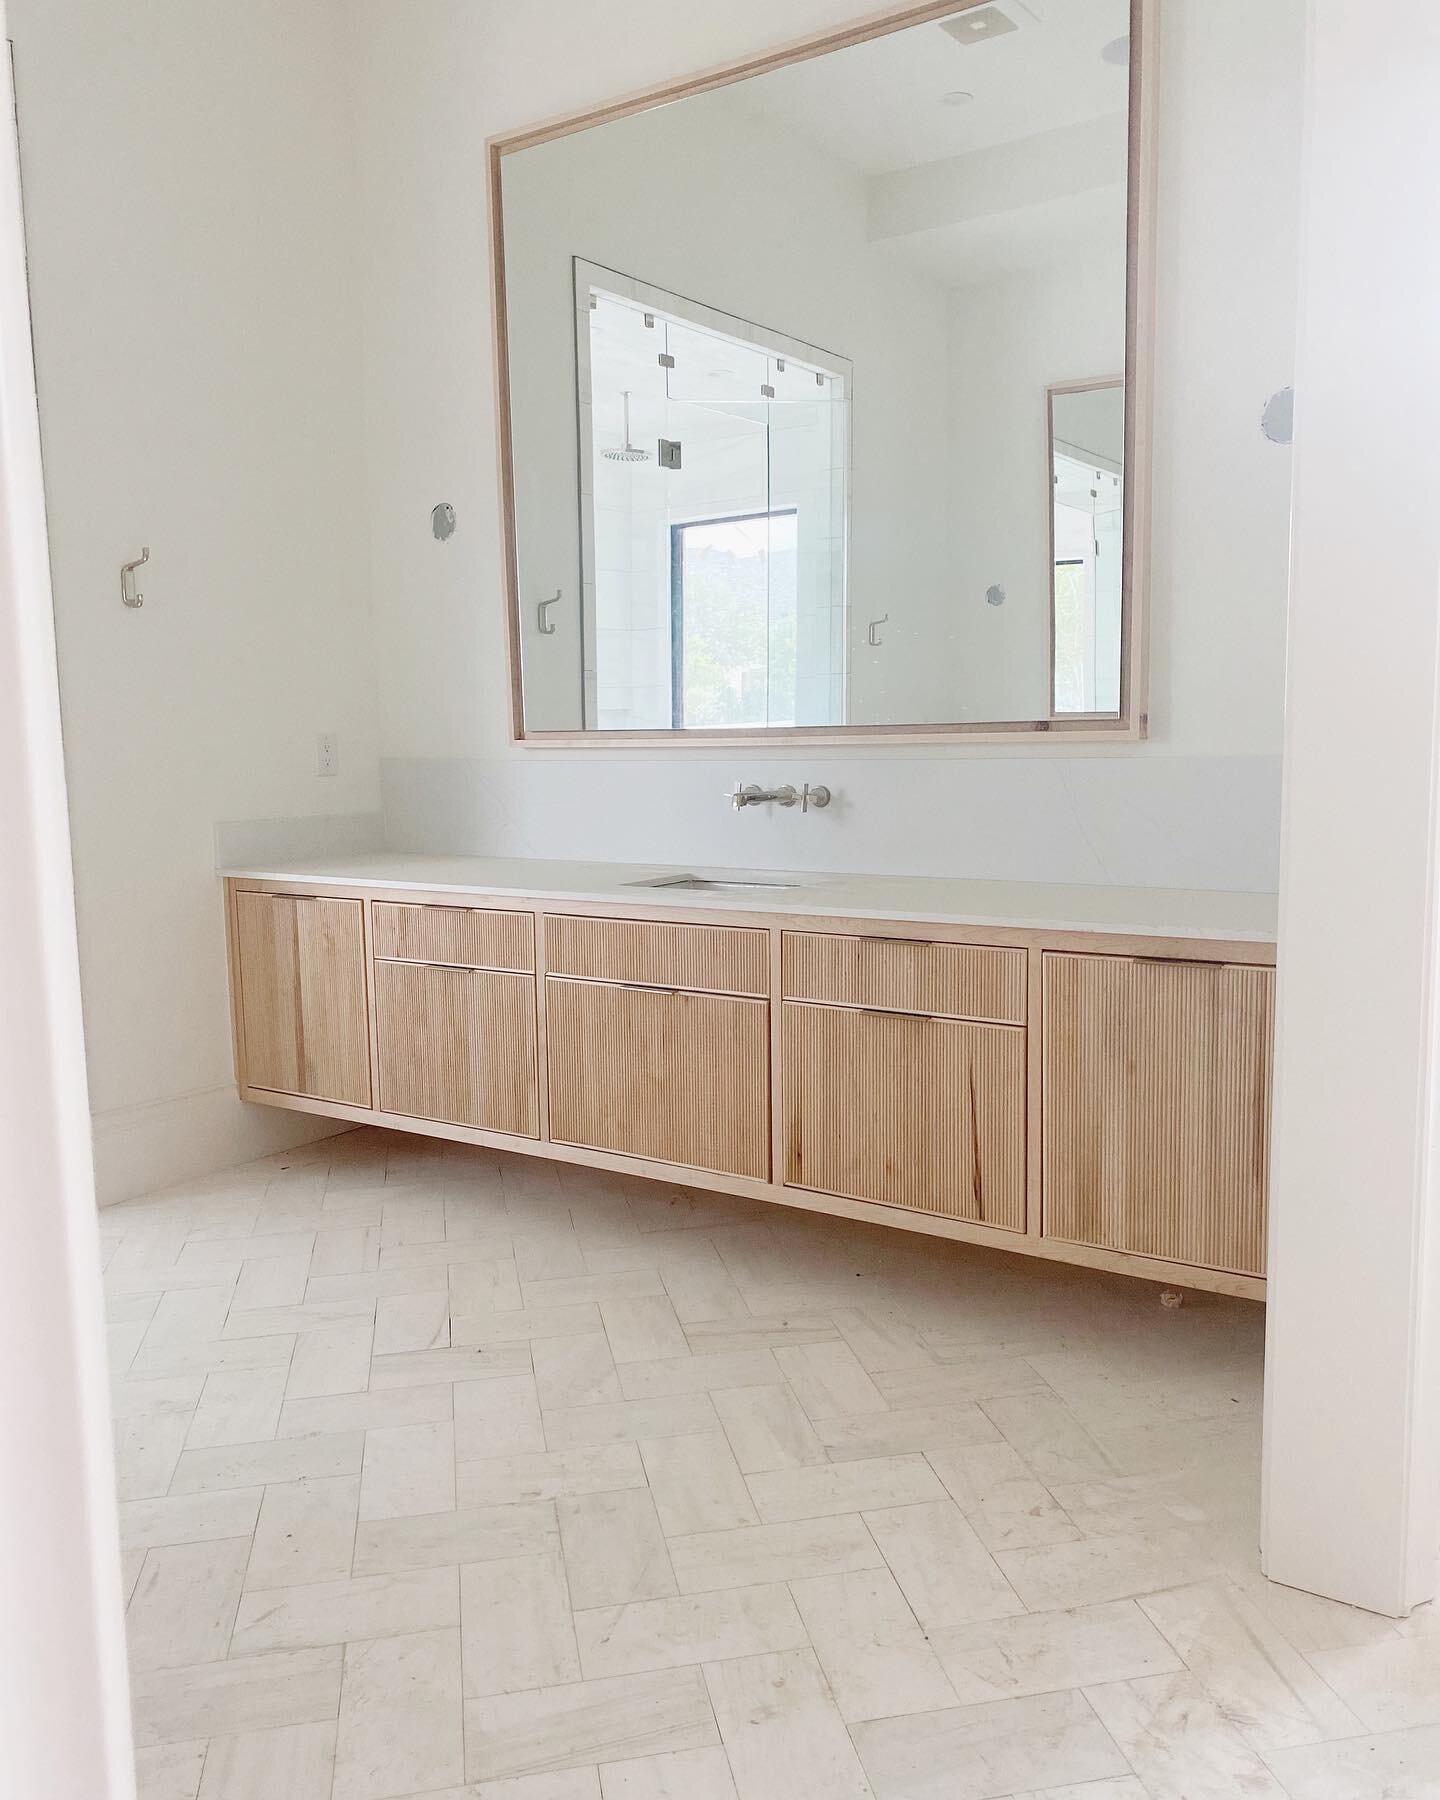 This floating vanity in the master bathroom at #mourtonmakeitadouble 🔥. 
&bull;
&bull;
&bull;
&bull;
&bull;
&bull;
&bull;
&bull;
&bull;
&bull;
#masterbathroomdesign#masterbathroomideas#masterbathroomgoals#bathroomsofinsta#bathroomsofig#masterbathroo